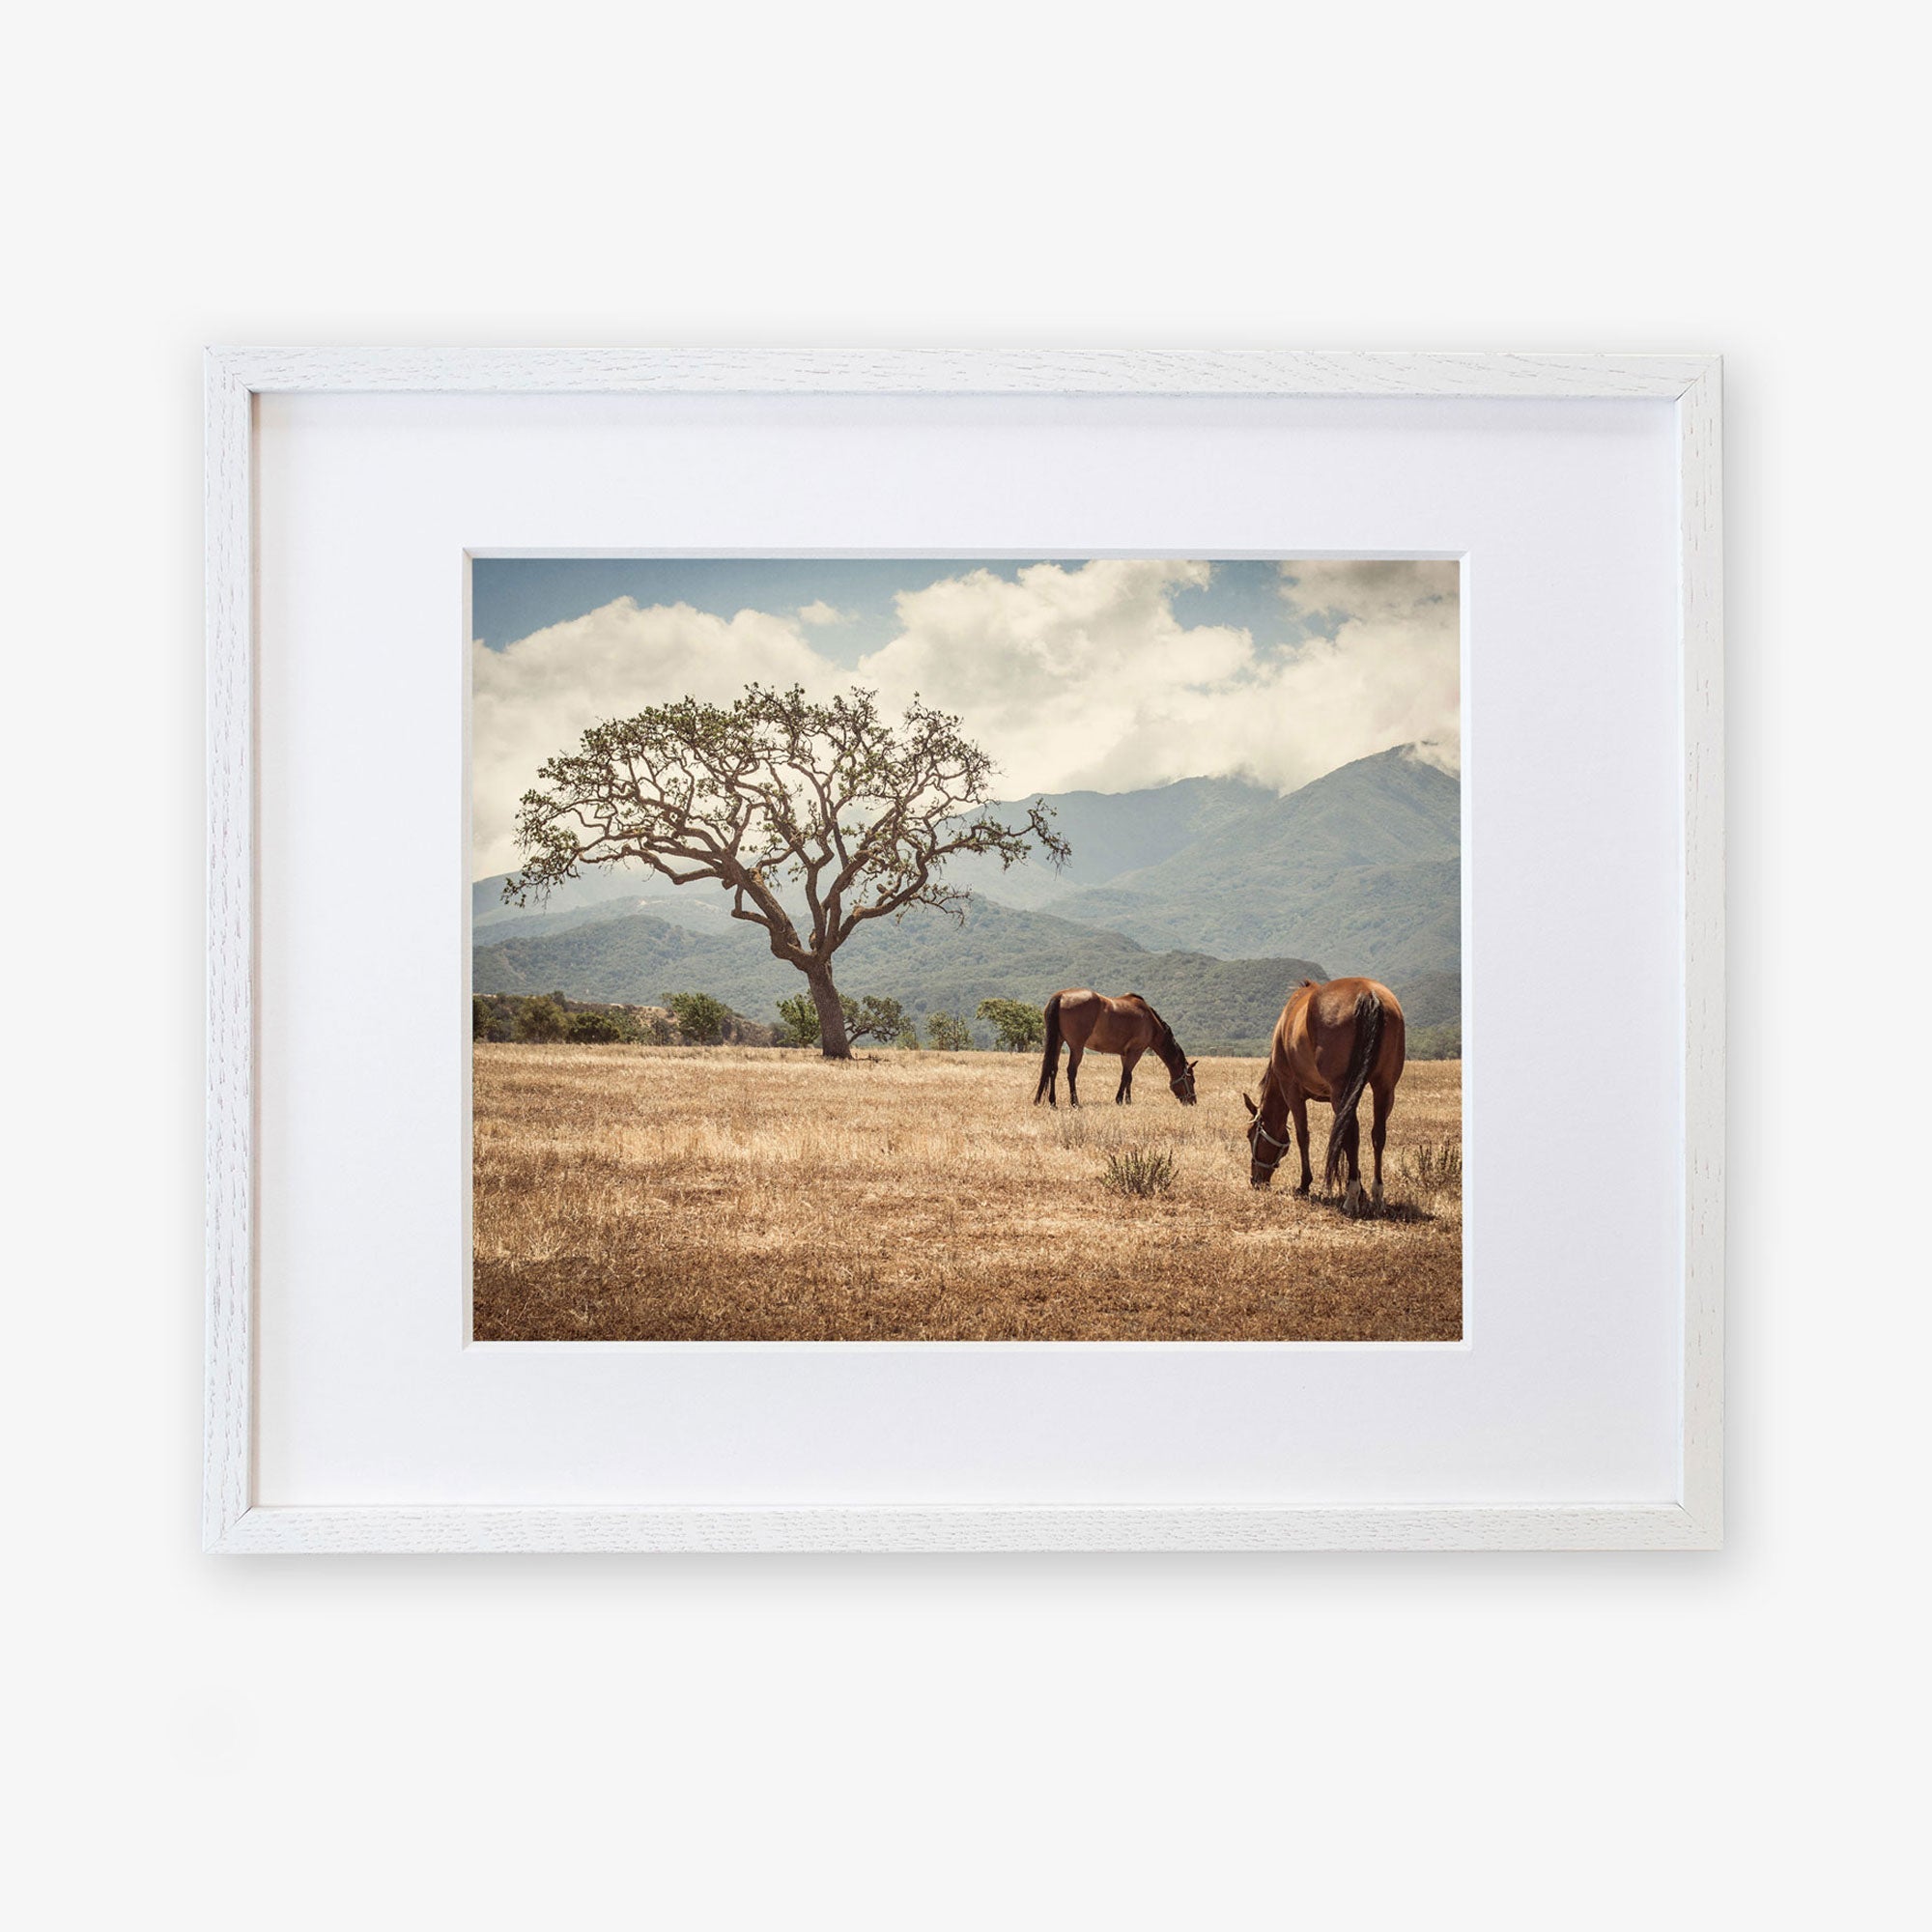 Framed image of two horses grazing under a broad tree in a golden field in Santa Ynez Valley with distant misty mountains under a light cloudy sky - Rustic Print of Horses in a Field, &#39;Santa Ynez Horses&#39; by Offley Green.